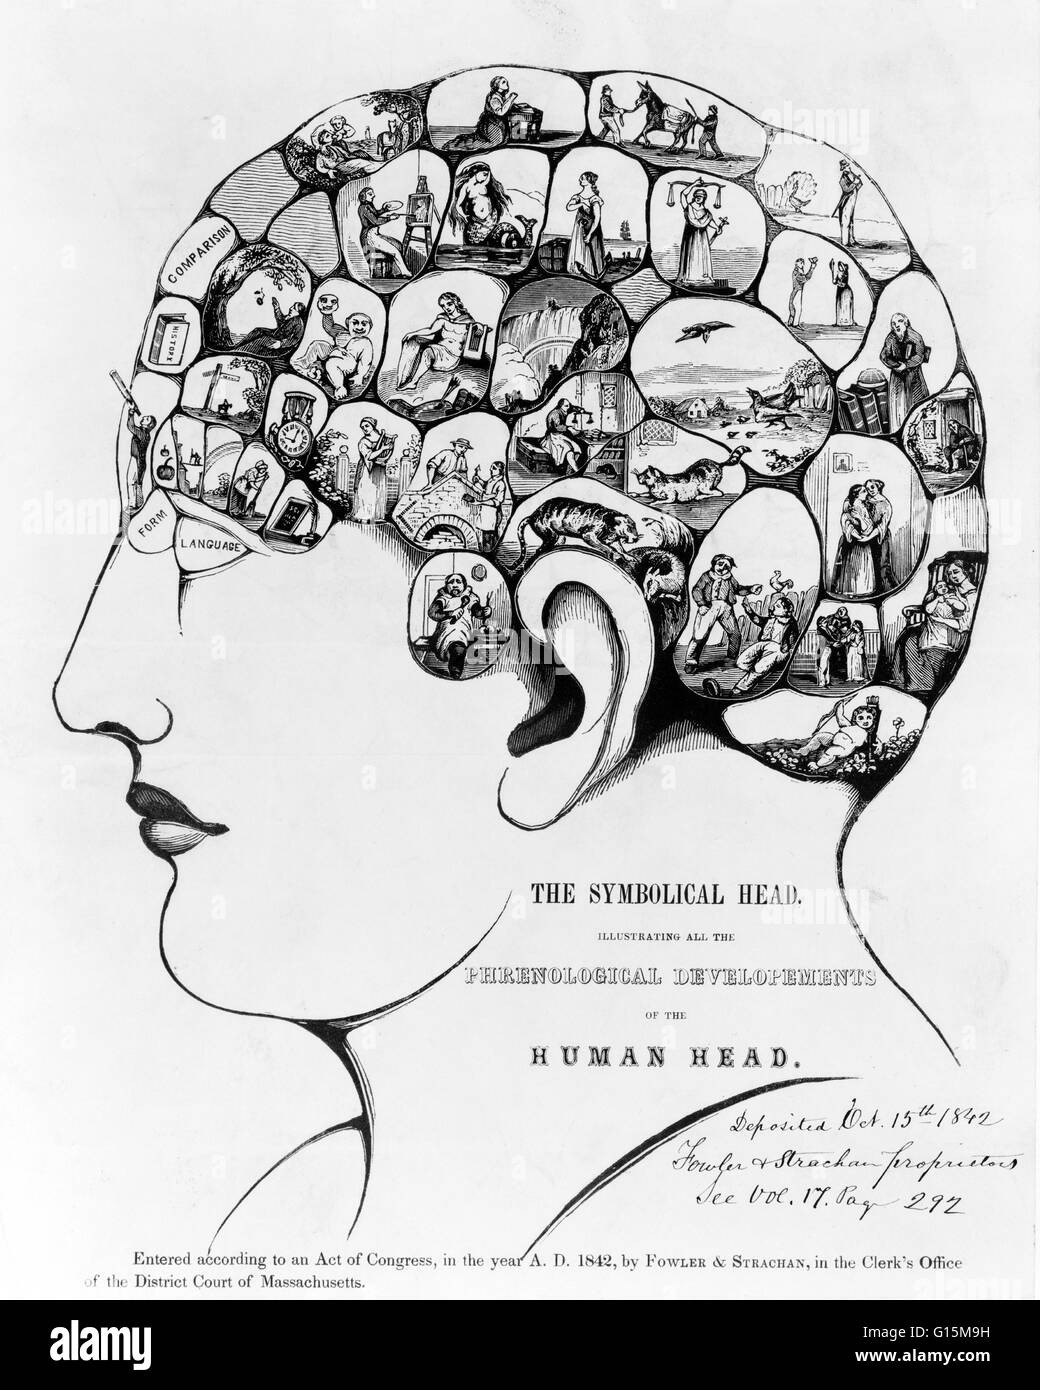 The Symbolical head, illustrating all the phrenological developments of the human head. Phrenology is the science which studies the relationships between a person's character and the morphology of the skull. It is a very ancient object of study. The first Stock Photo